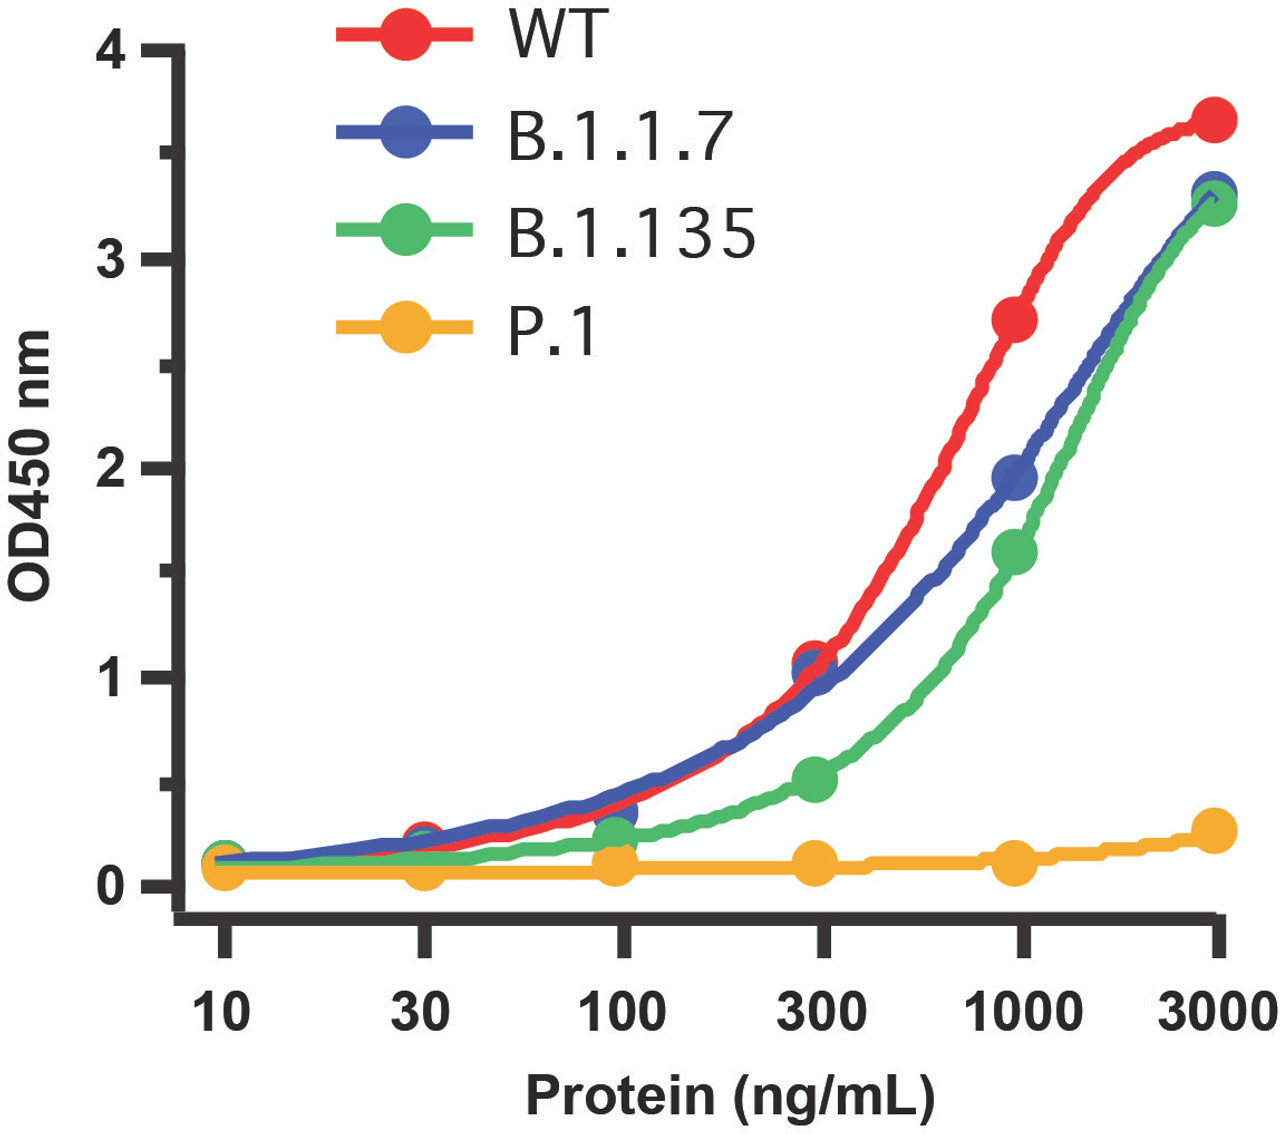 Figure 1 Detection of SARS-CoV-2 Variant Proteins with Spike S1 Antibodies by Direct ELISA  
Coating Antigen: SARS-CoV-2 full length spike proteins, including WT, UK variant (B.1.1.7) , SA variant (B.1.135) and Brazil (P.1) . Dilution: 10-3000 ng/mL. Incubate at 4 &#730; C overnight.
Detection Antibodies: SARS-CoV-2 Spike S1 Antibody, 9083, 1 &#956;g/mL, incubate at RT for 1 hr.
Secondary Antibodies: Goat anti-rabbit HRP at 1:20, 000, incubate at RT for 1 hr.
Immunogen region of antibody (9083) includes sites 20T and 26P that were mutated in Brazil variant P.1.. Therefore, Spike S1 Antibody (9083) cannot detect P.1 variant. </strong>